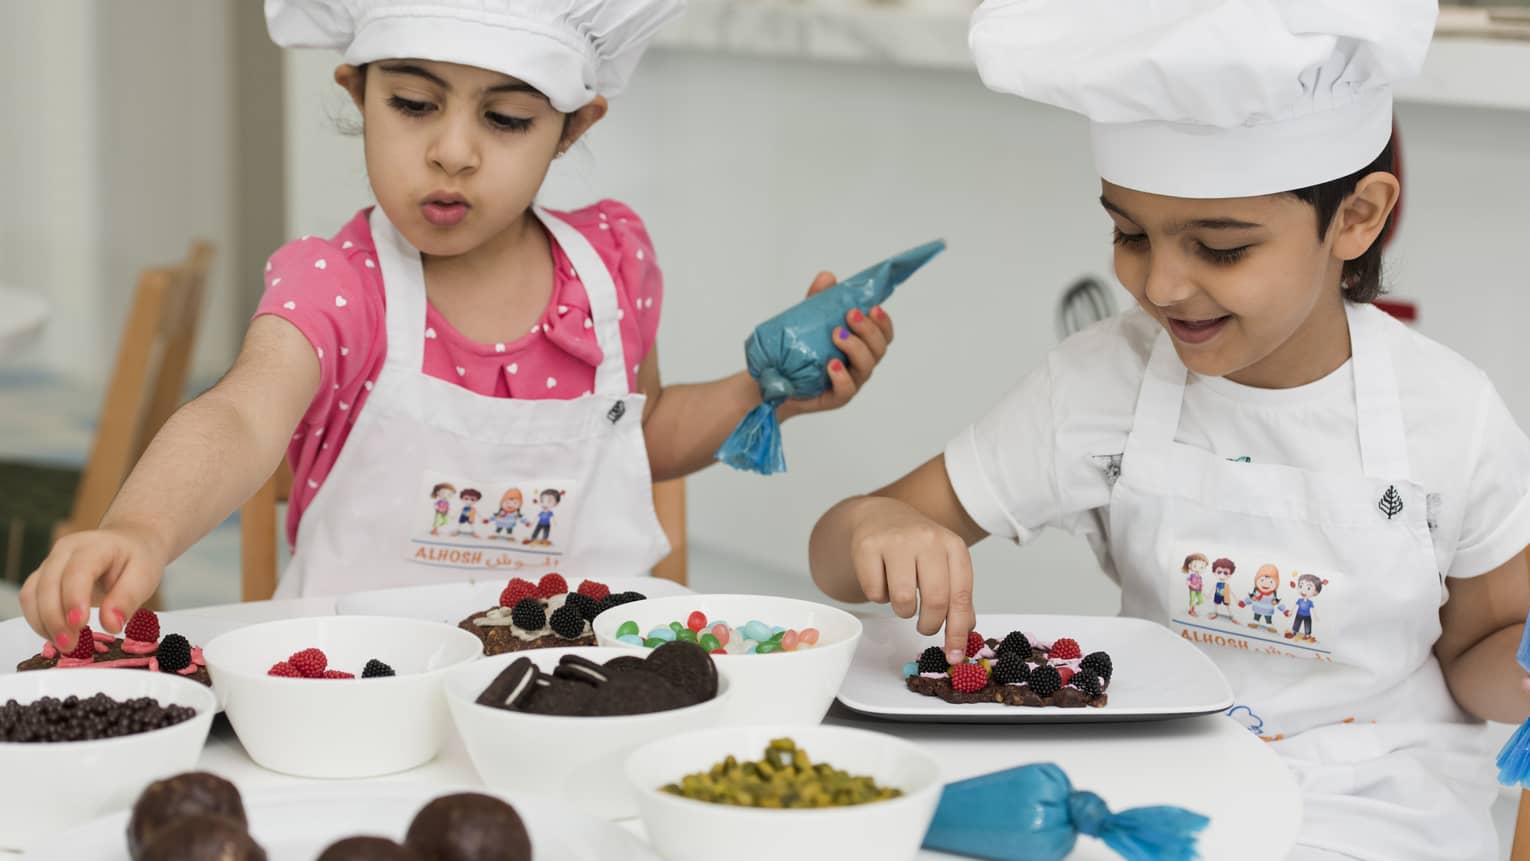 Two young girls in chef hats and aprons decorating cookies.